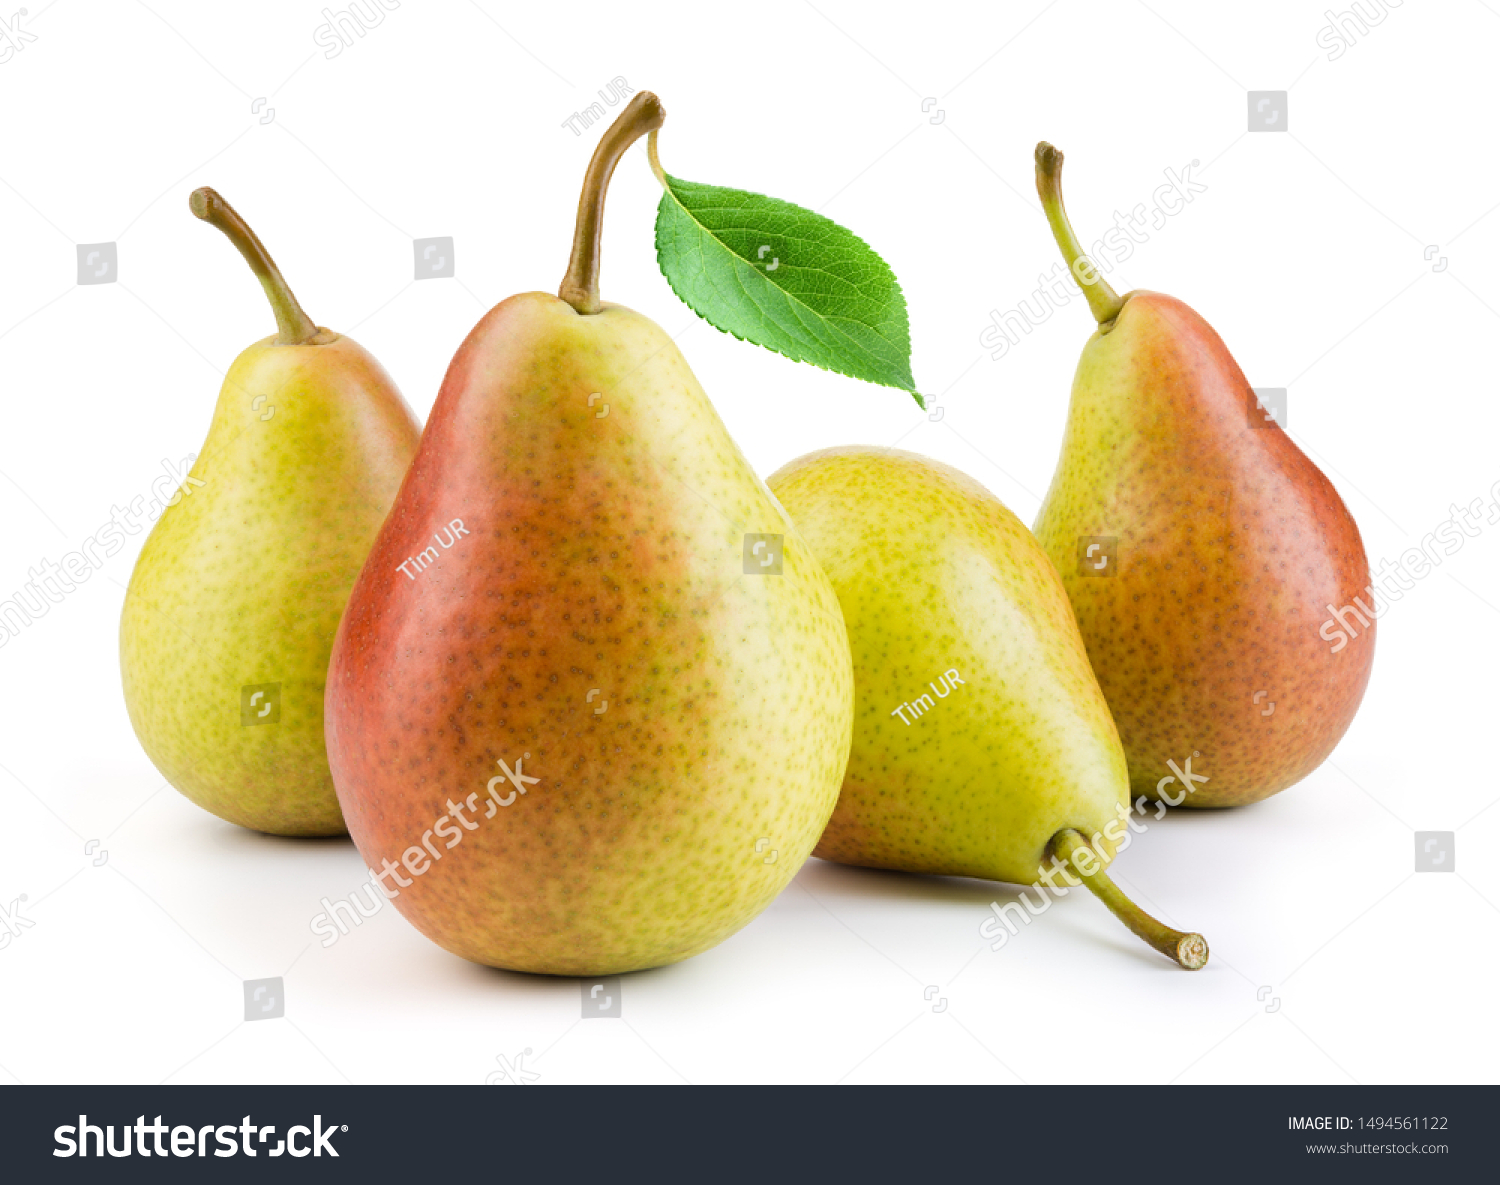 Pears isolated. Pears with leaf on white background. Full depth of field.  #1494561122